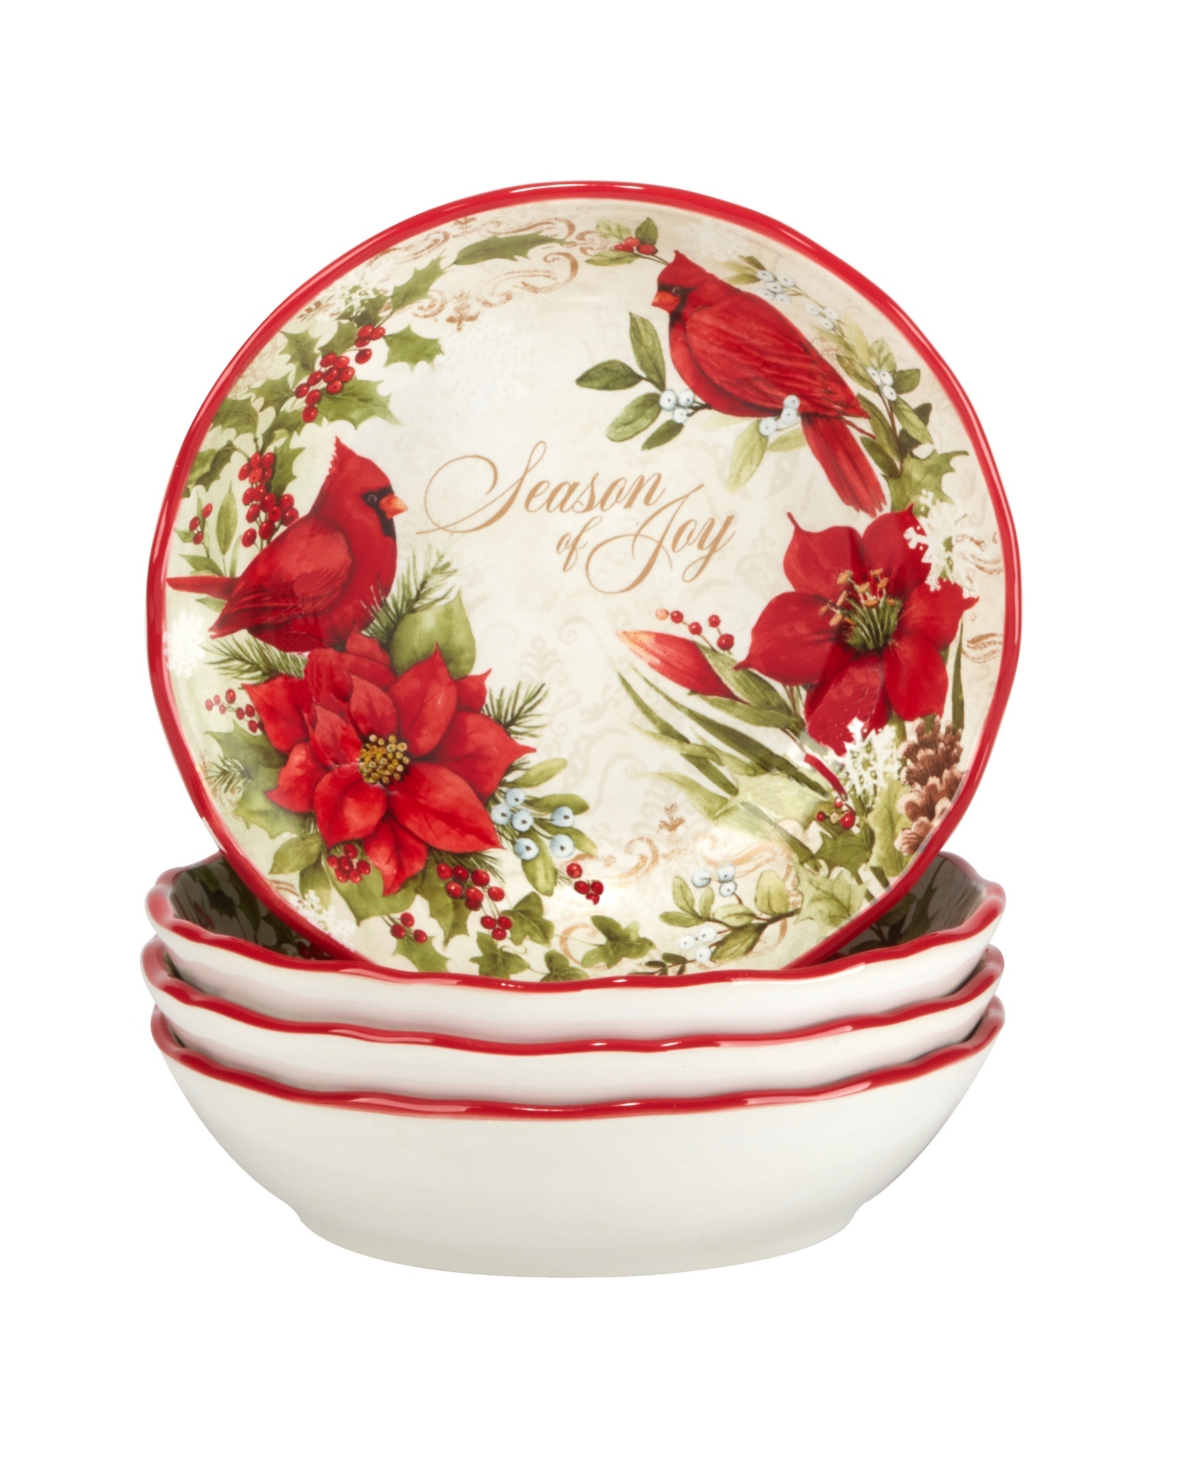 Winter's Medley 4 Piece Soup Bowl Set - Red and White